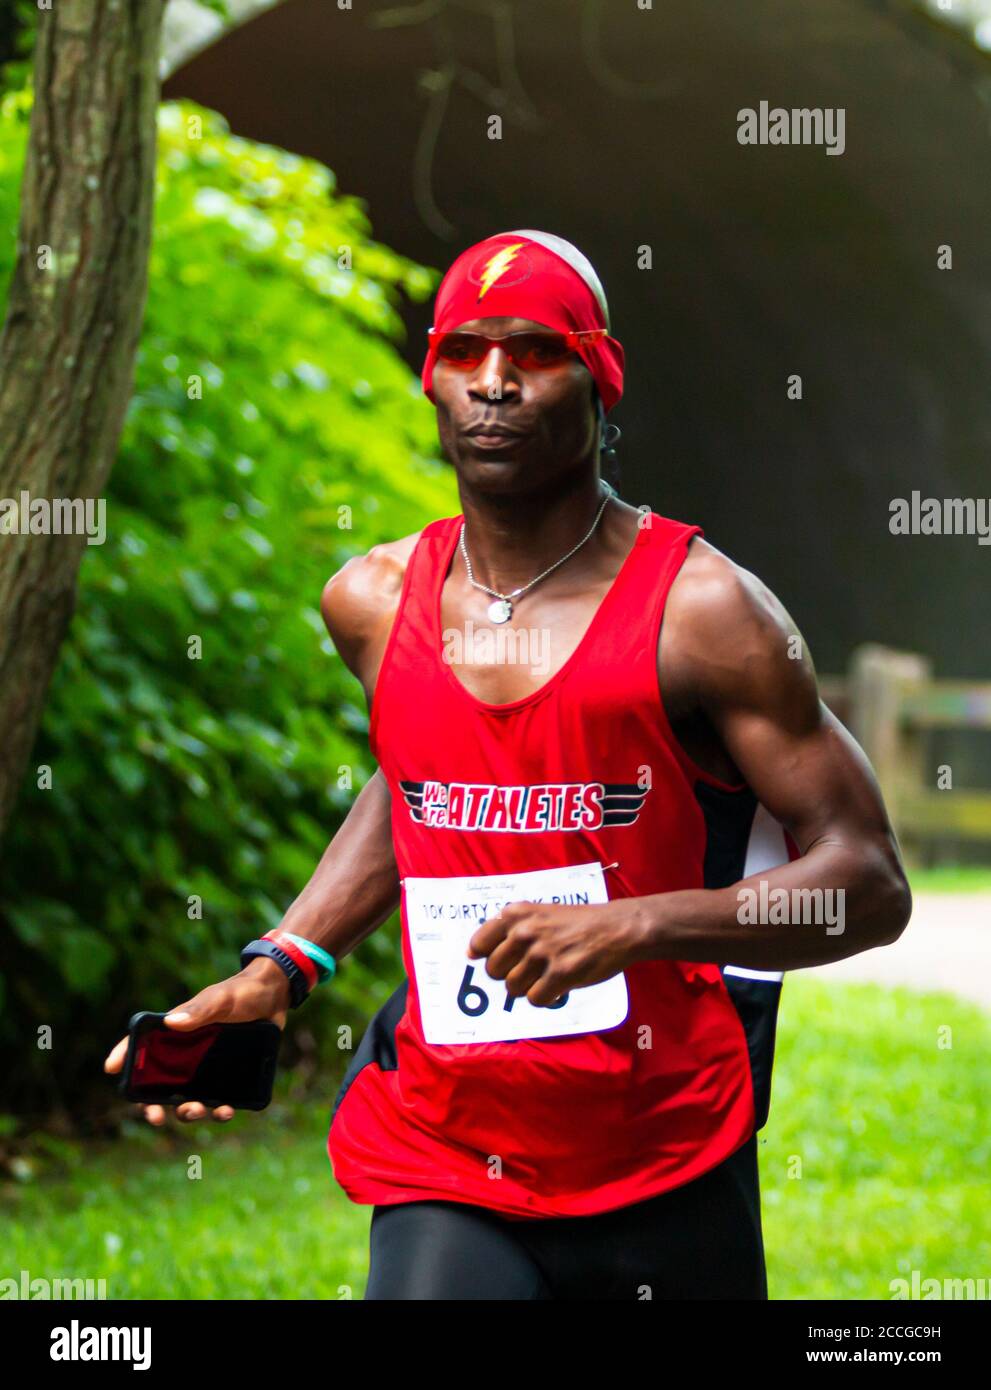 Babylon, New York, USA - 12 August 2018: An African American runner with red bandana with the flash sidn on it during the Dirty Sock 10K trail race. Stock Photo